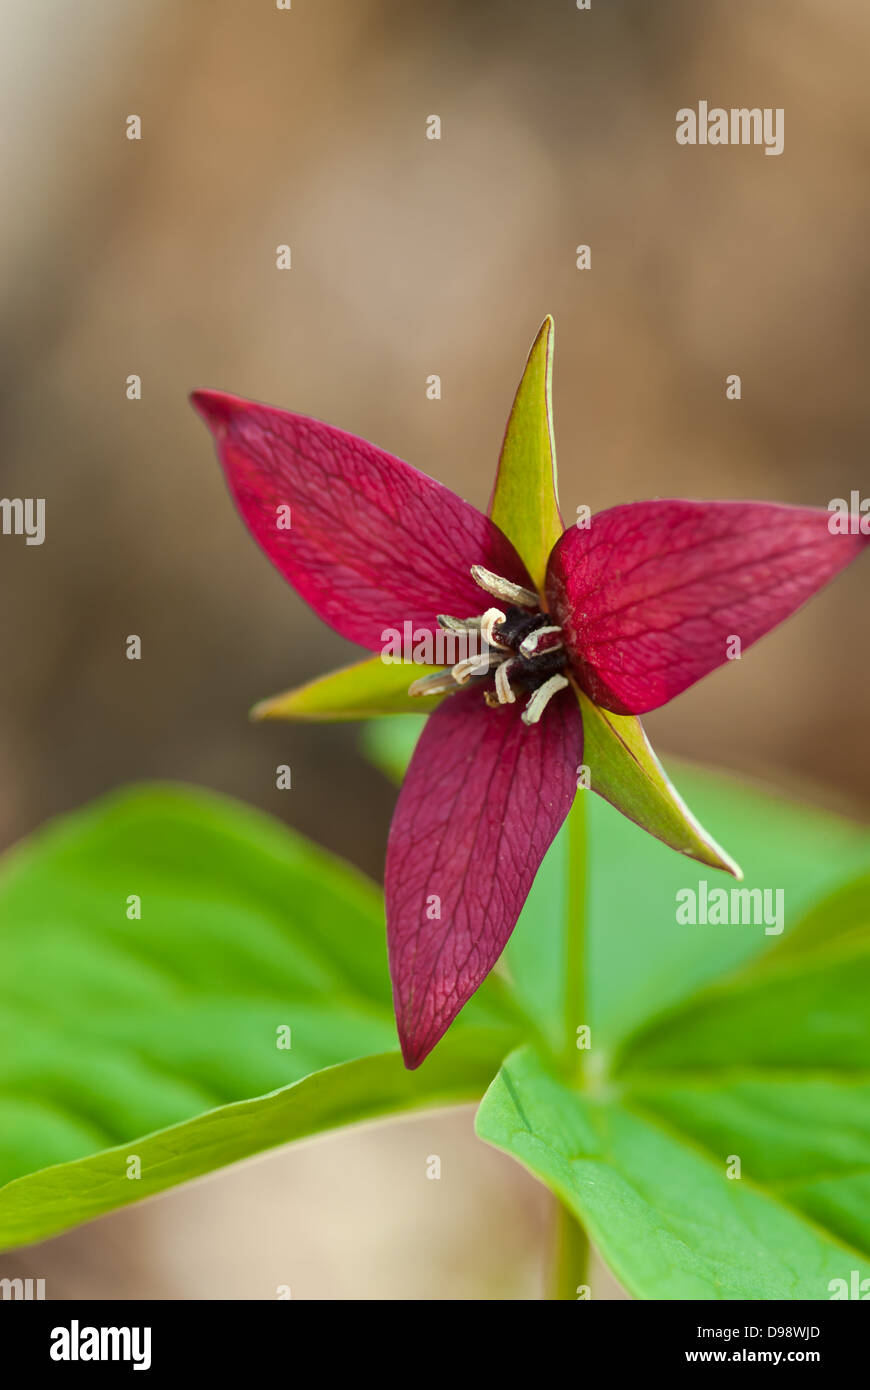 Single red trillium blossom fully open with stem and leaves in soft focus against a beige background Stock Photo